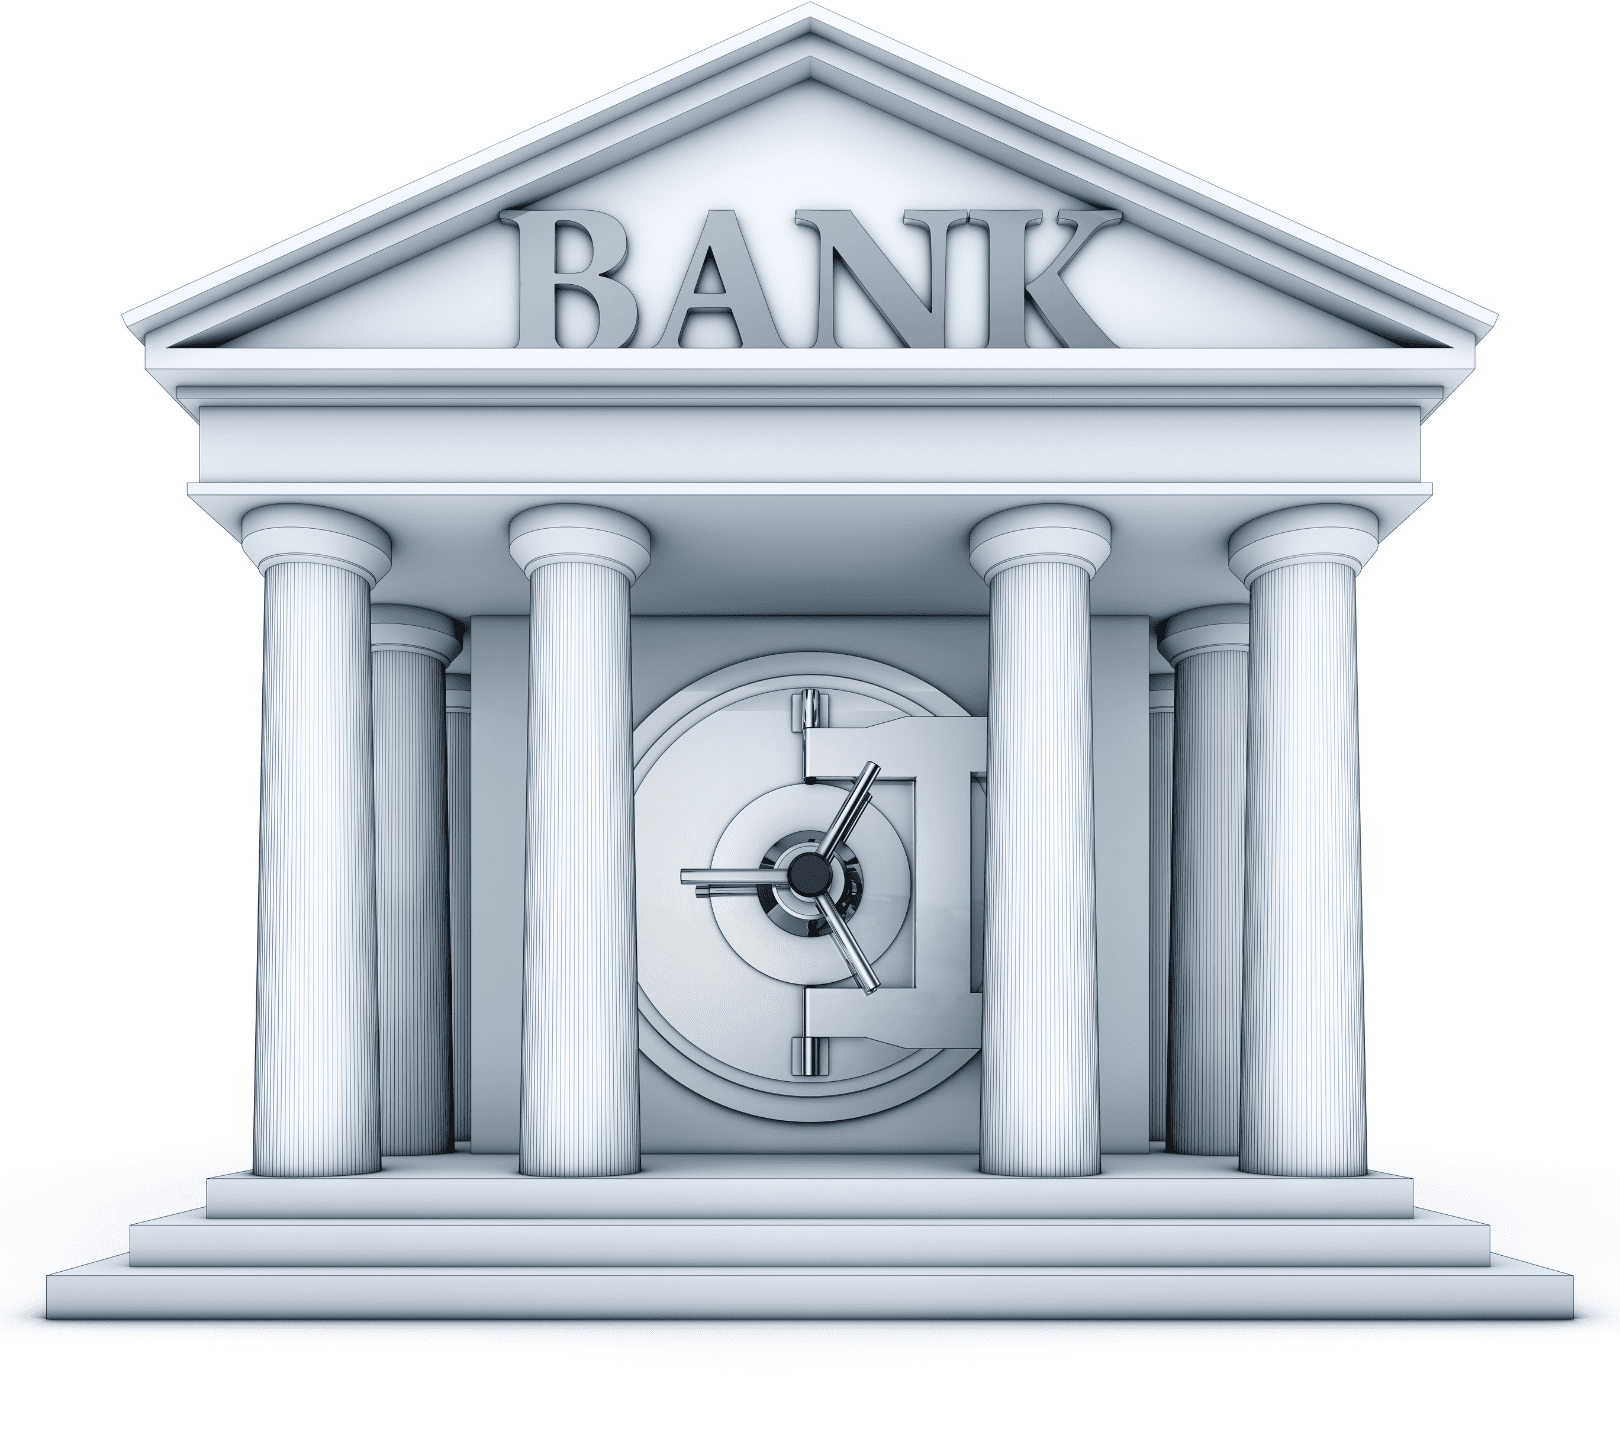 A representation of a bank building with a vault door on the front